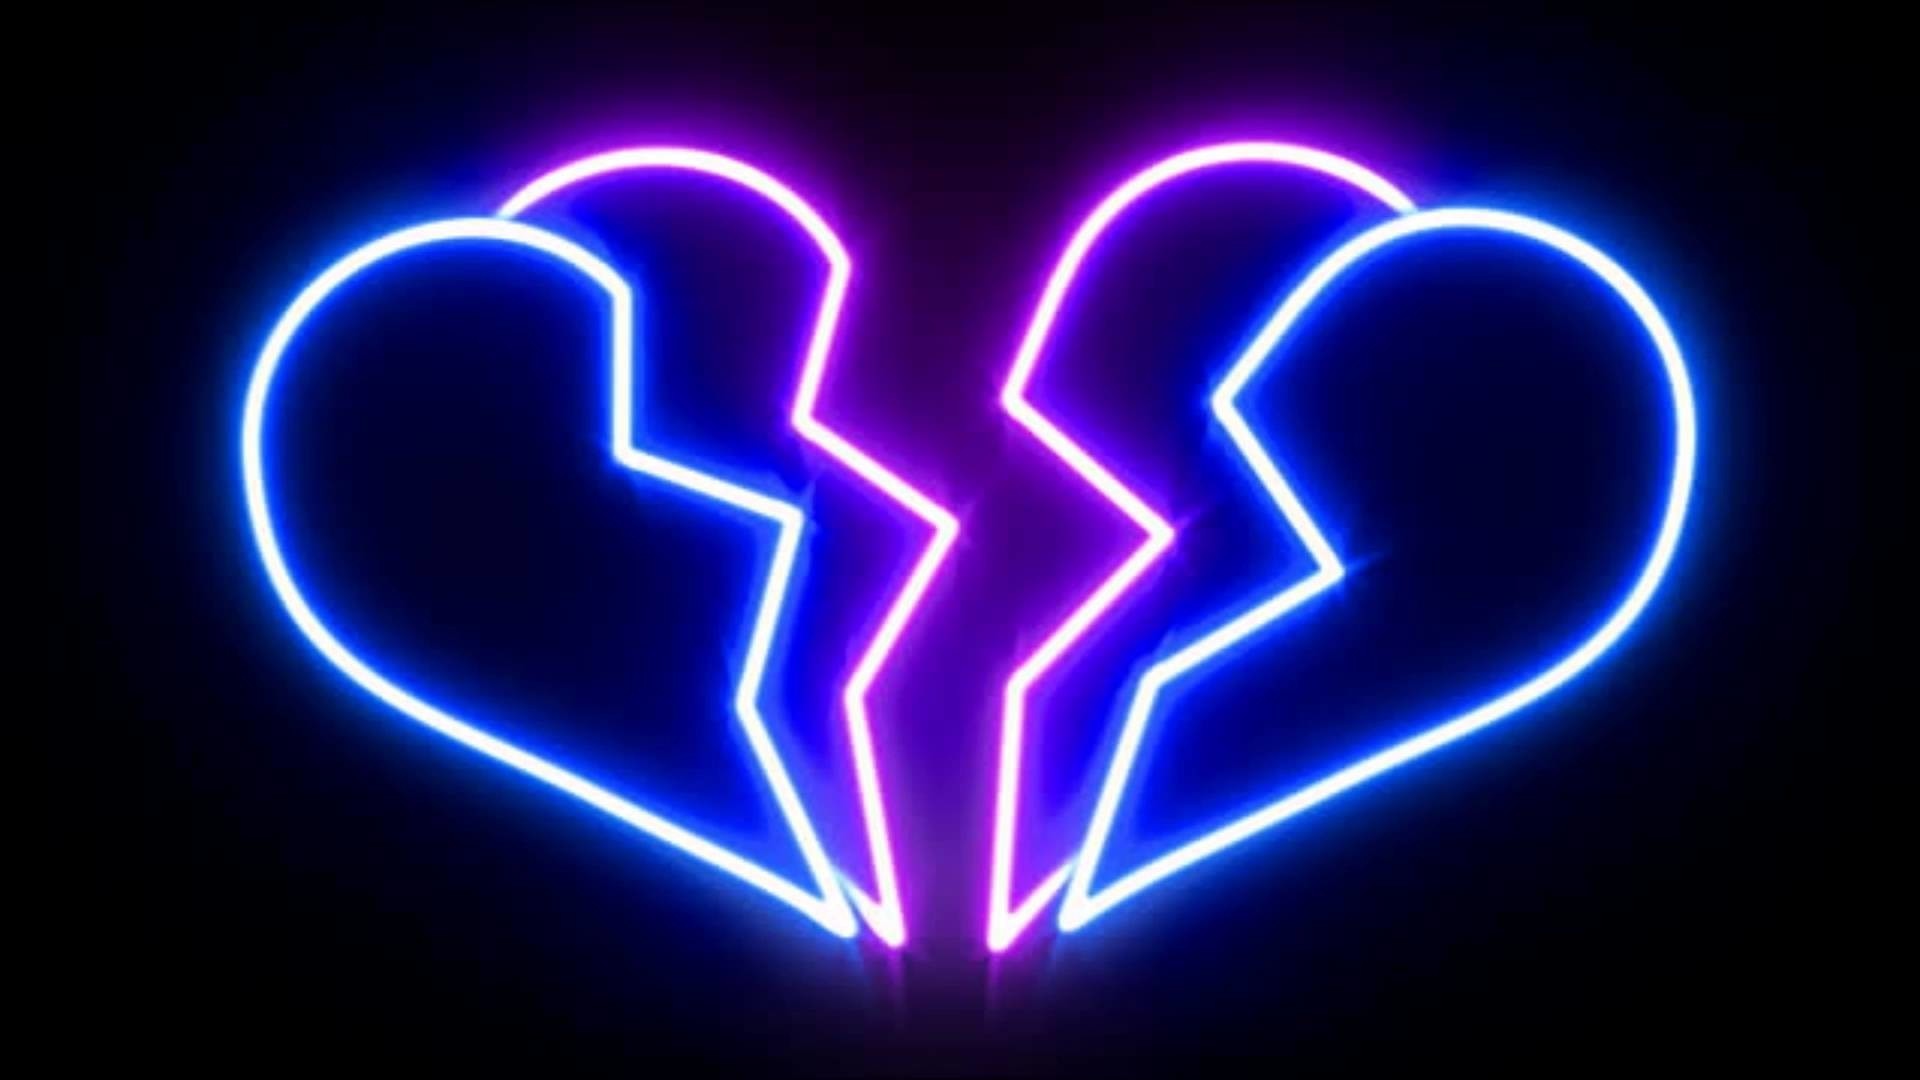 Heart Aesthetic Wallpaper Picture hd